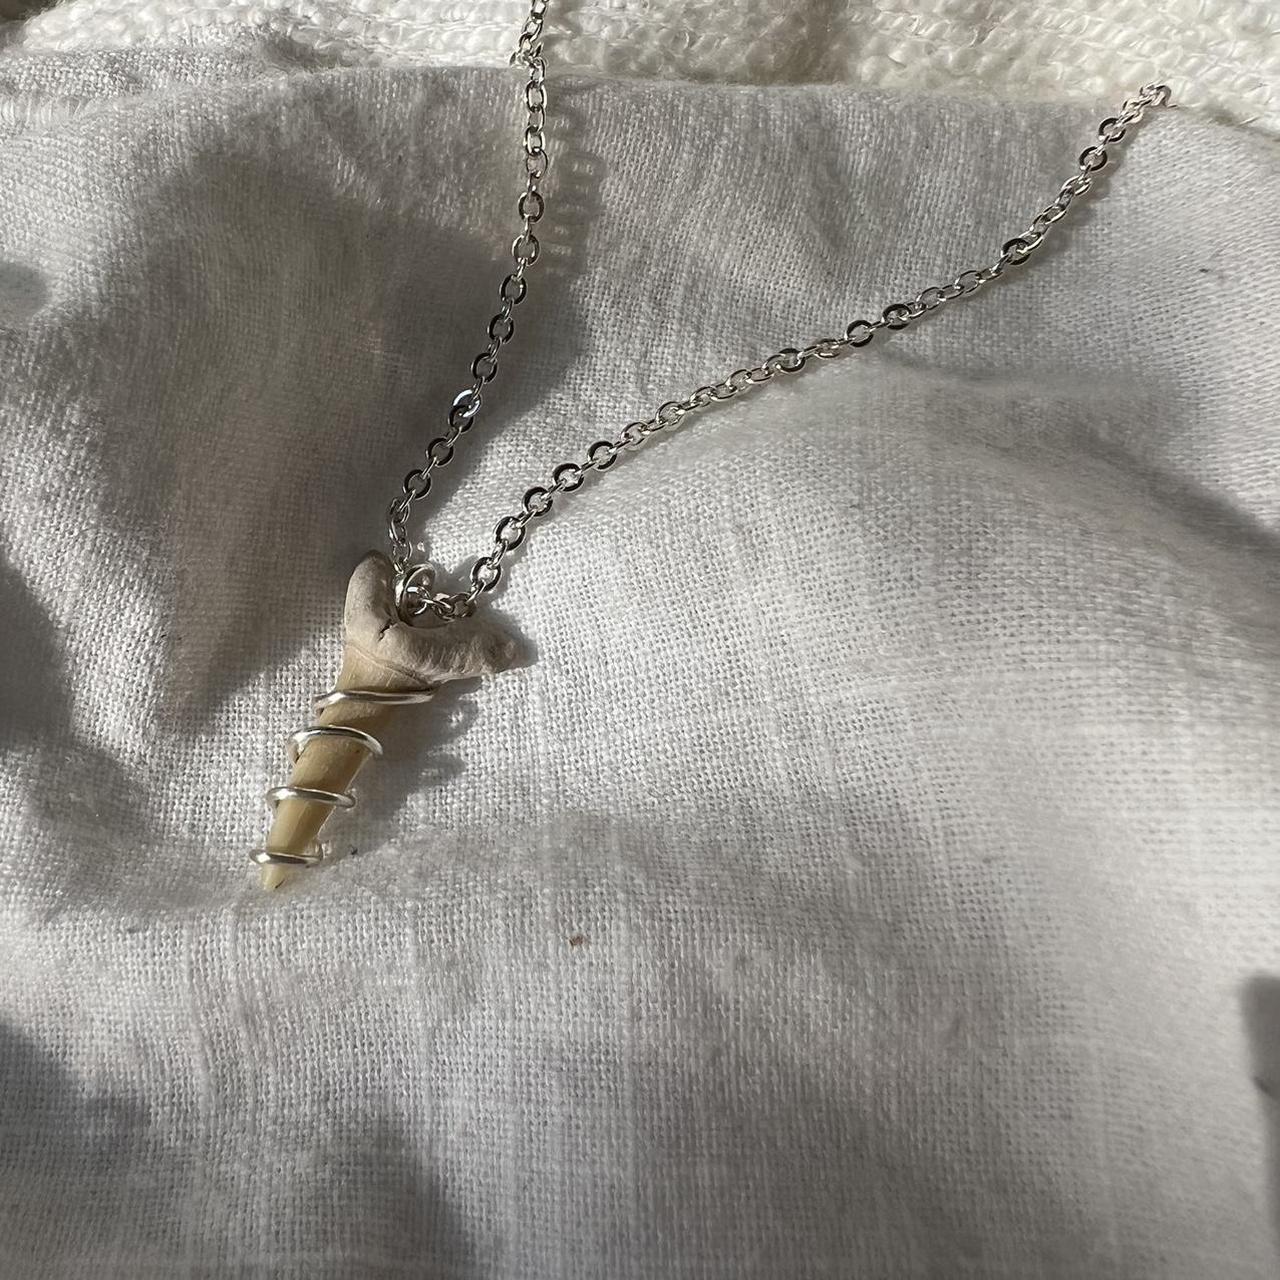 Shark Tooth Necklace: Gold PVD